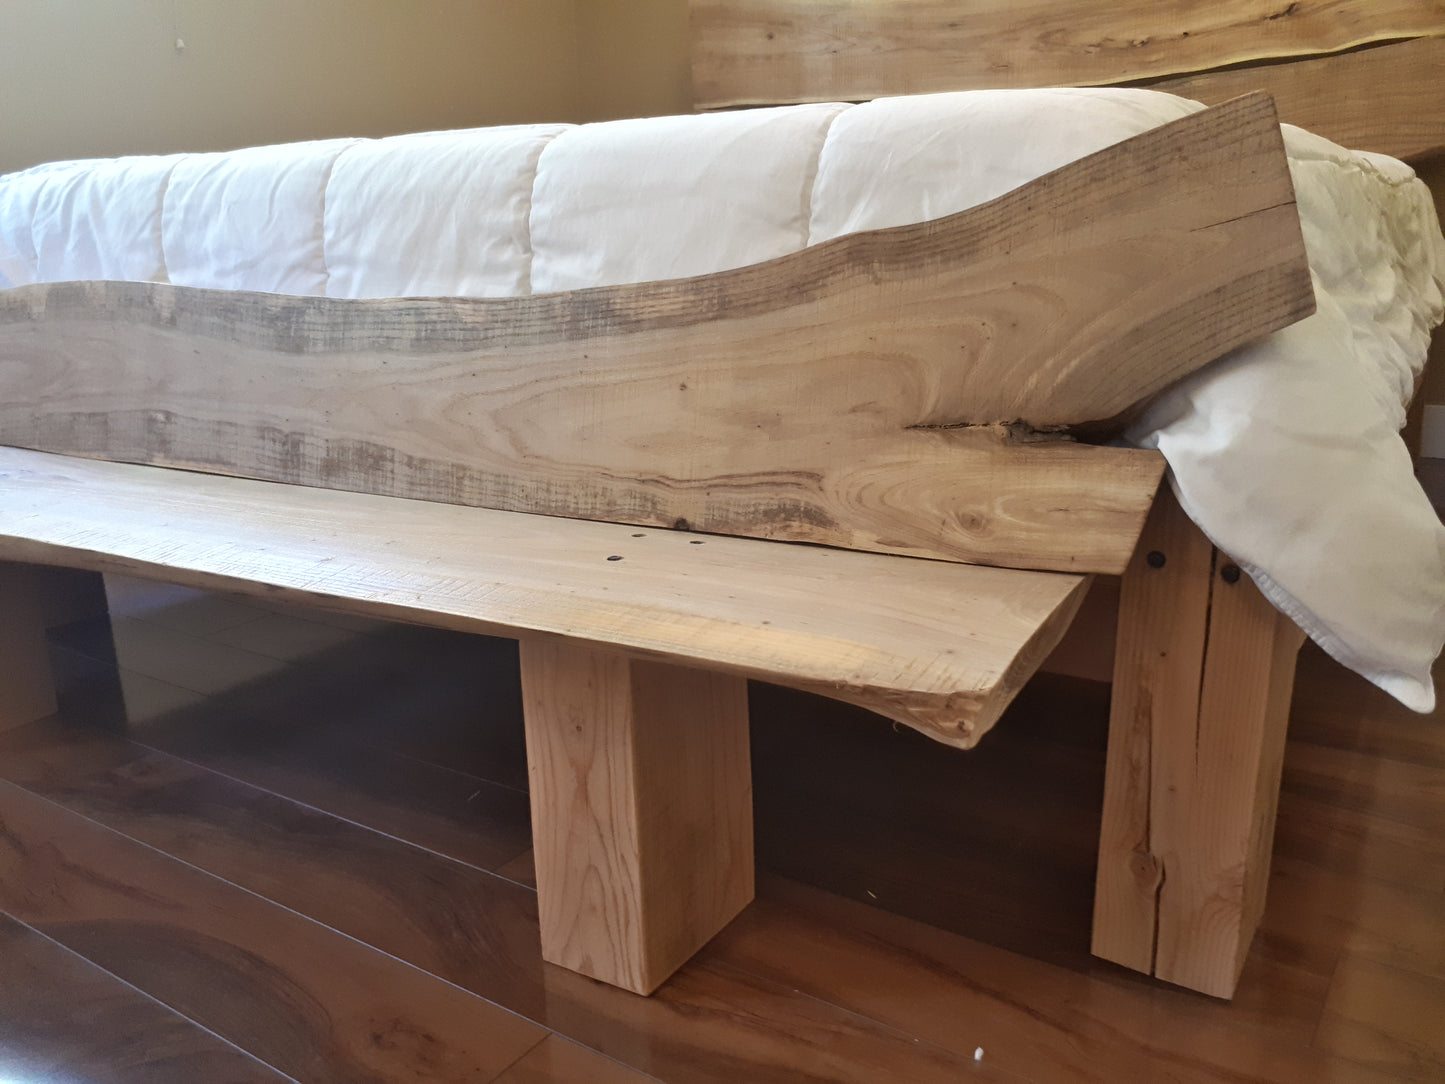 Live Edge Bed Frame - Limited Edition